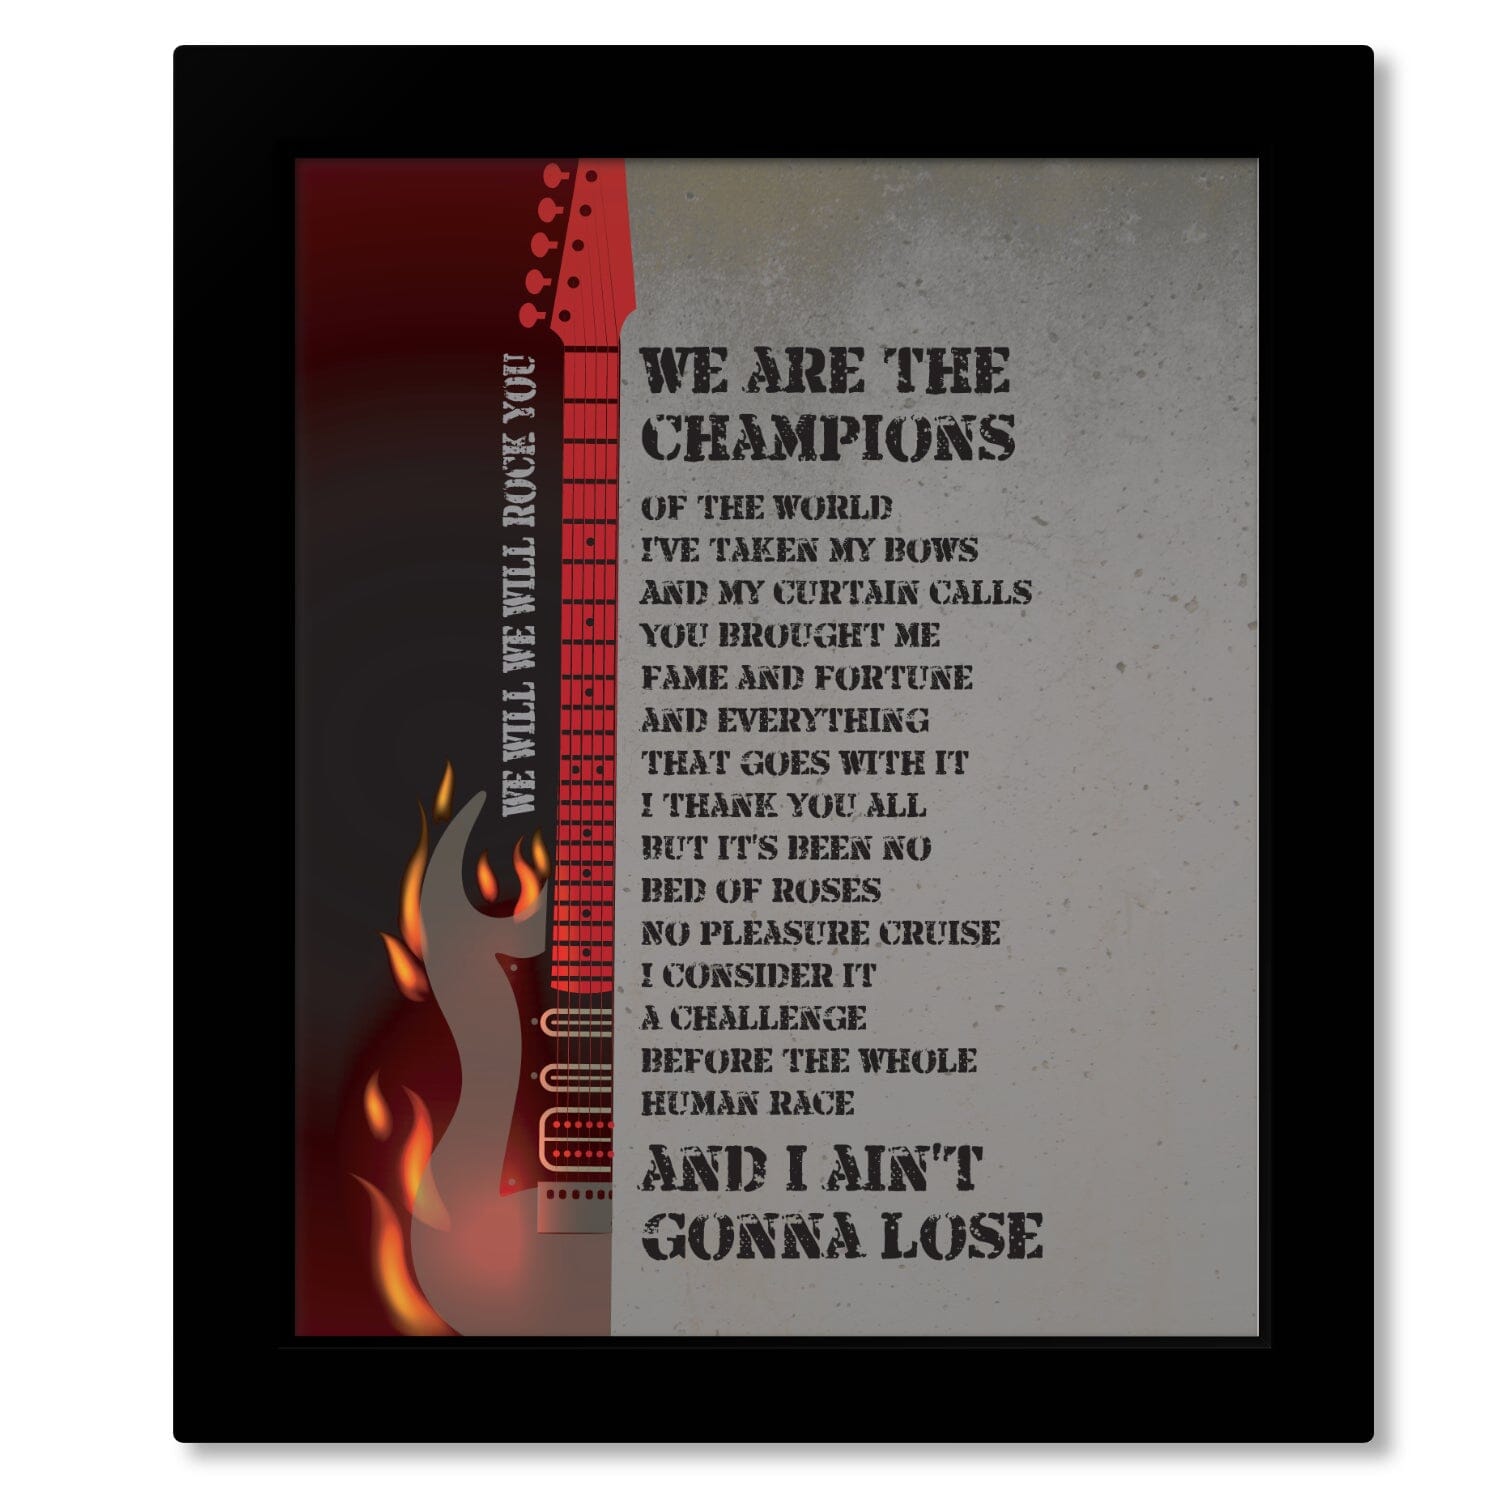 We Will Rock You, We are the Champions by Queen - Lyric Art Song Lyrics Art Song Lyrics Art 8x10 Framed Print (without mat) 